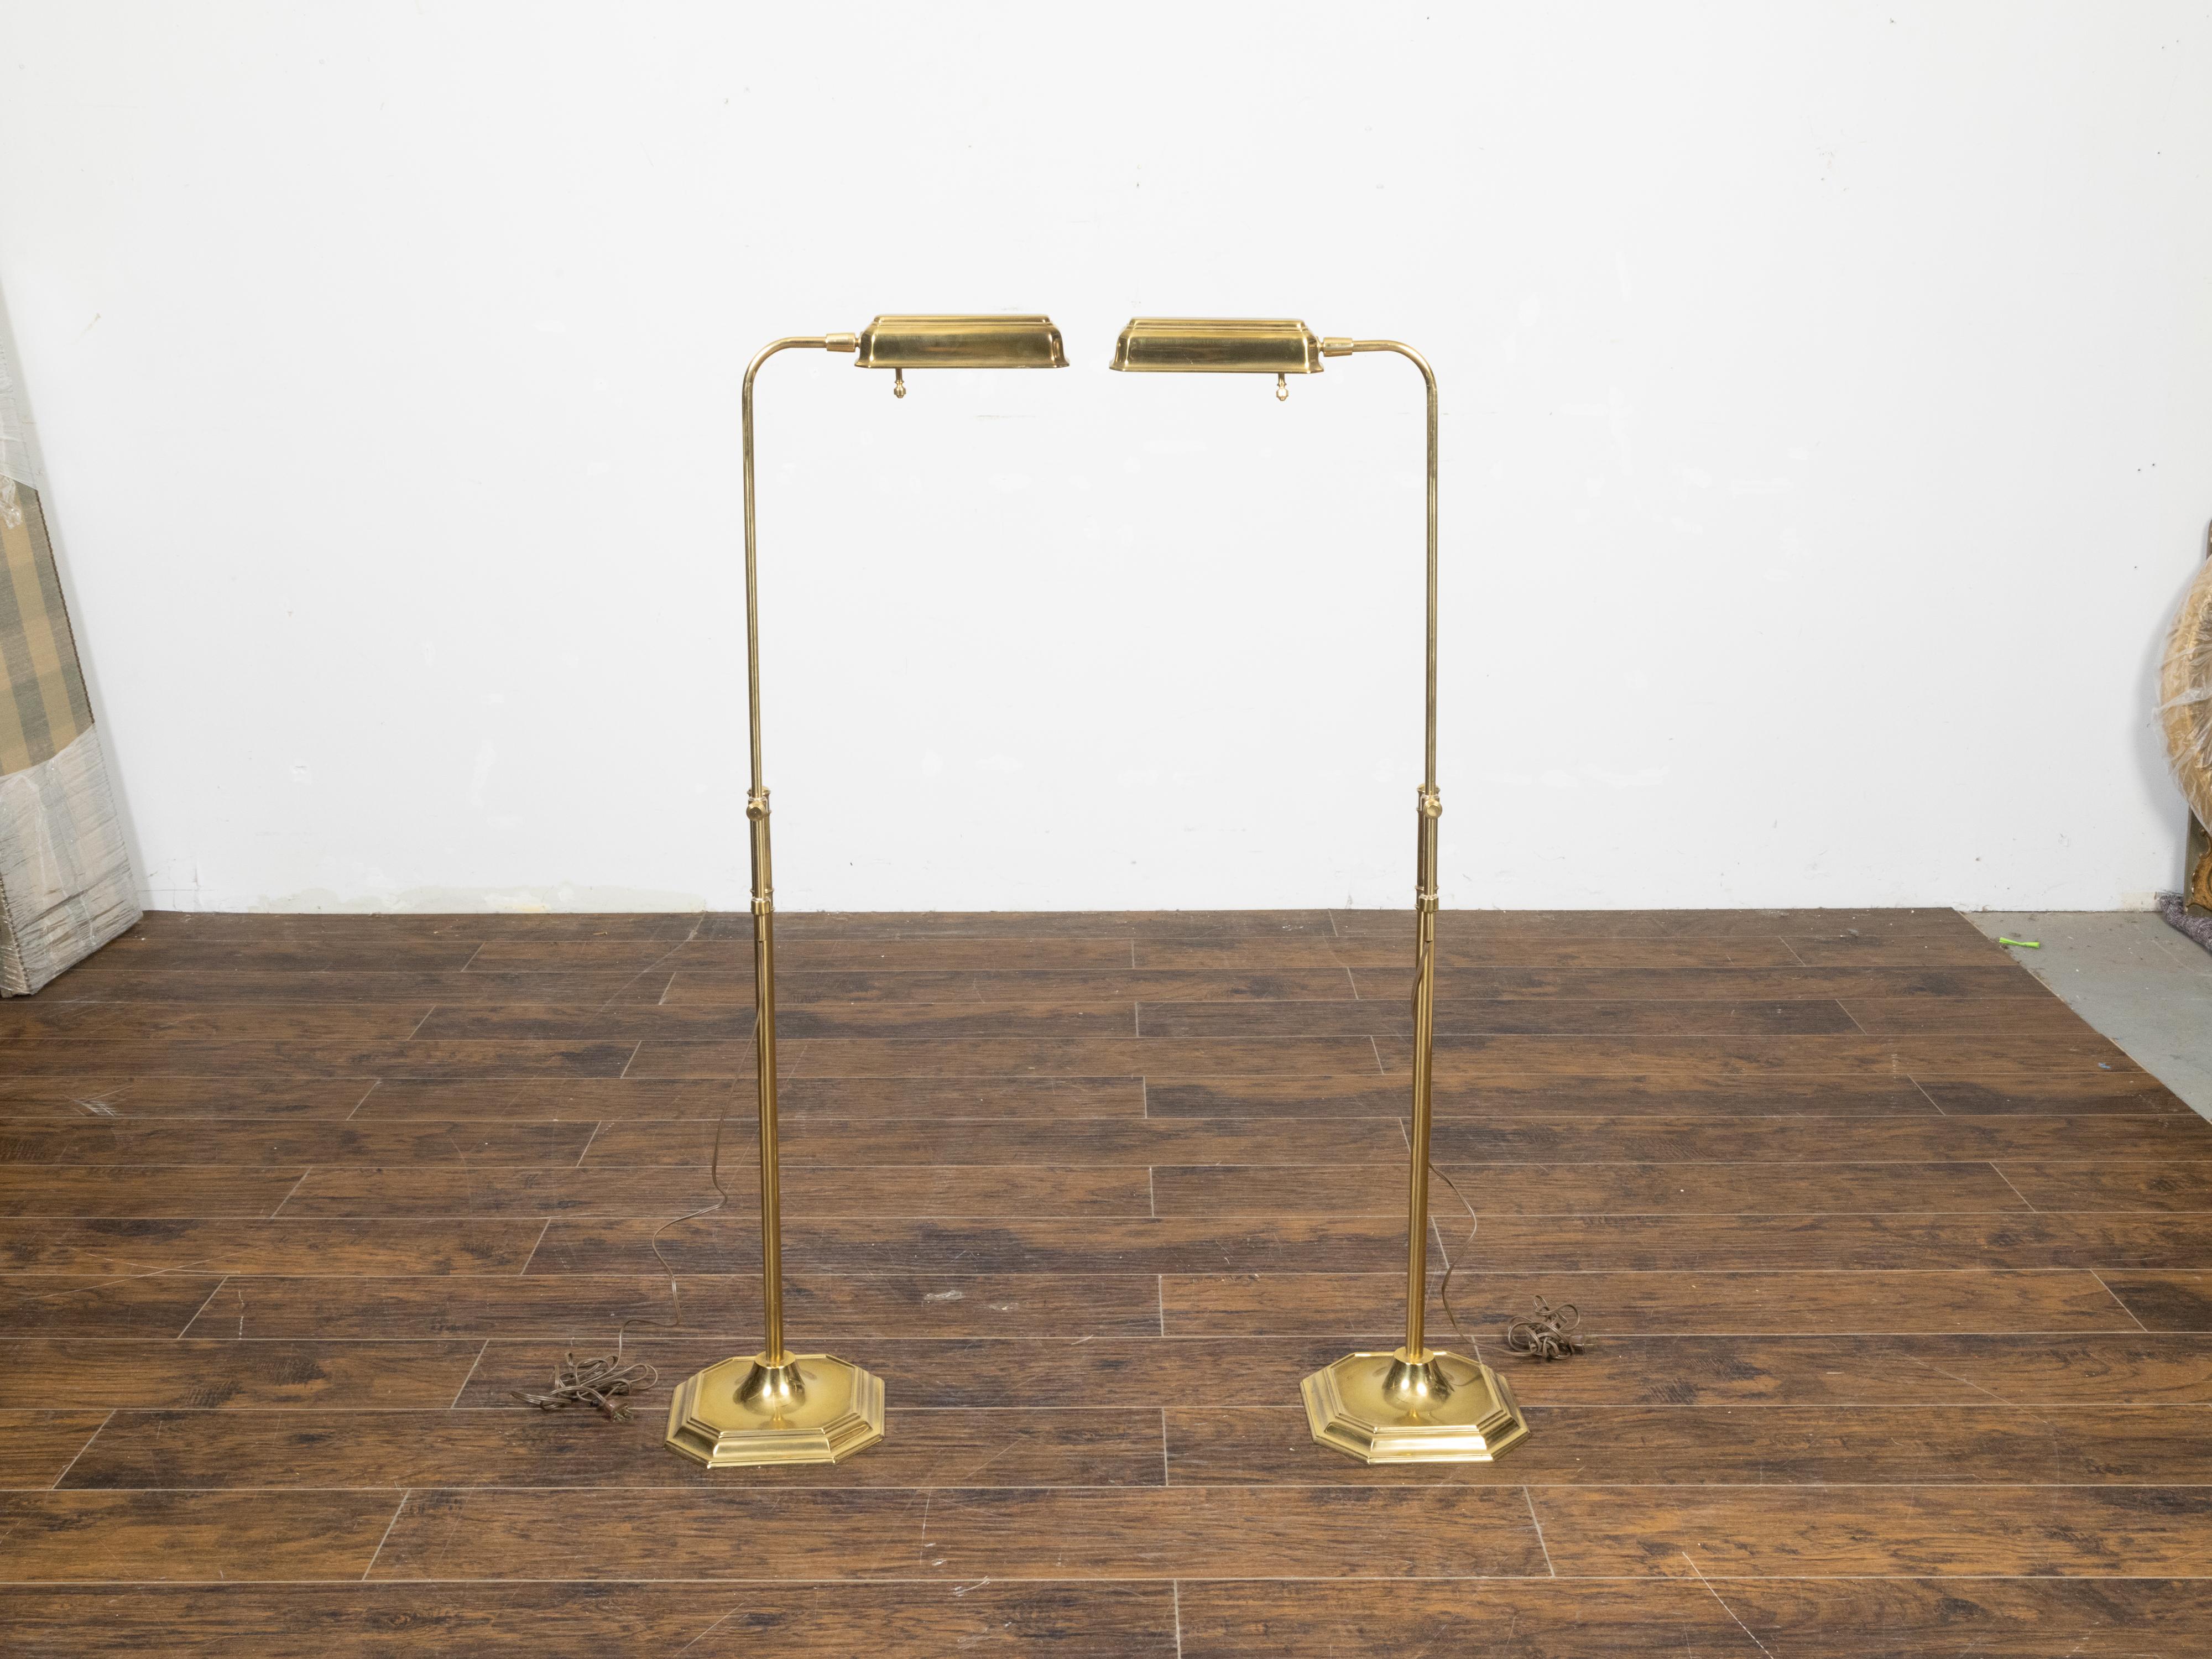 A pair of vintage English brass floor lamps from the mid 20th century, with adjustable heights, wired for the USA. Created in England during the Midcentury period, each of this pair of floor lamps have been professionally rewired for the USA and are